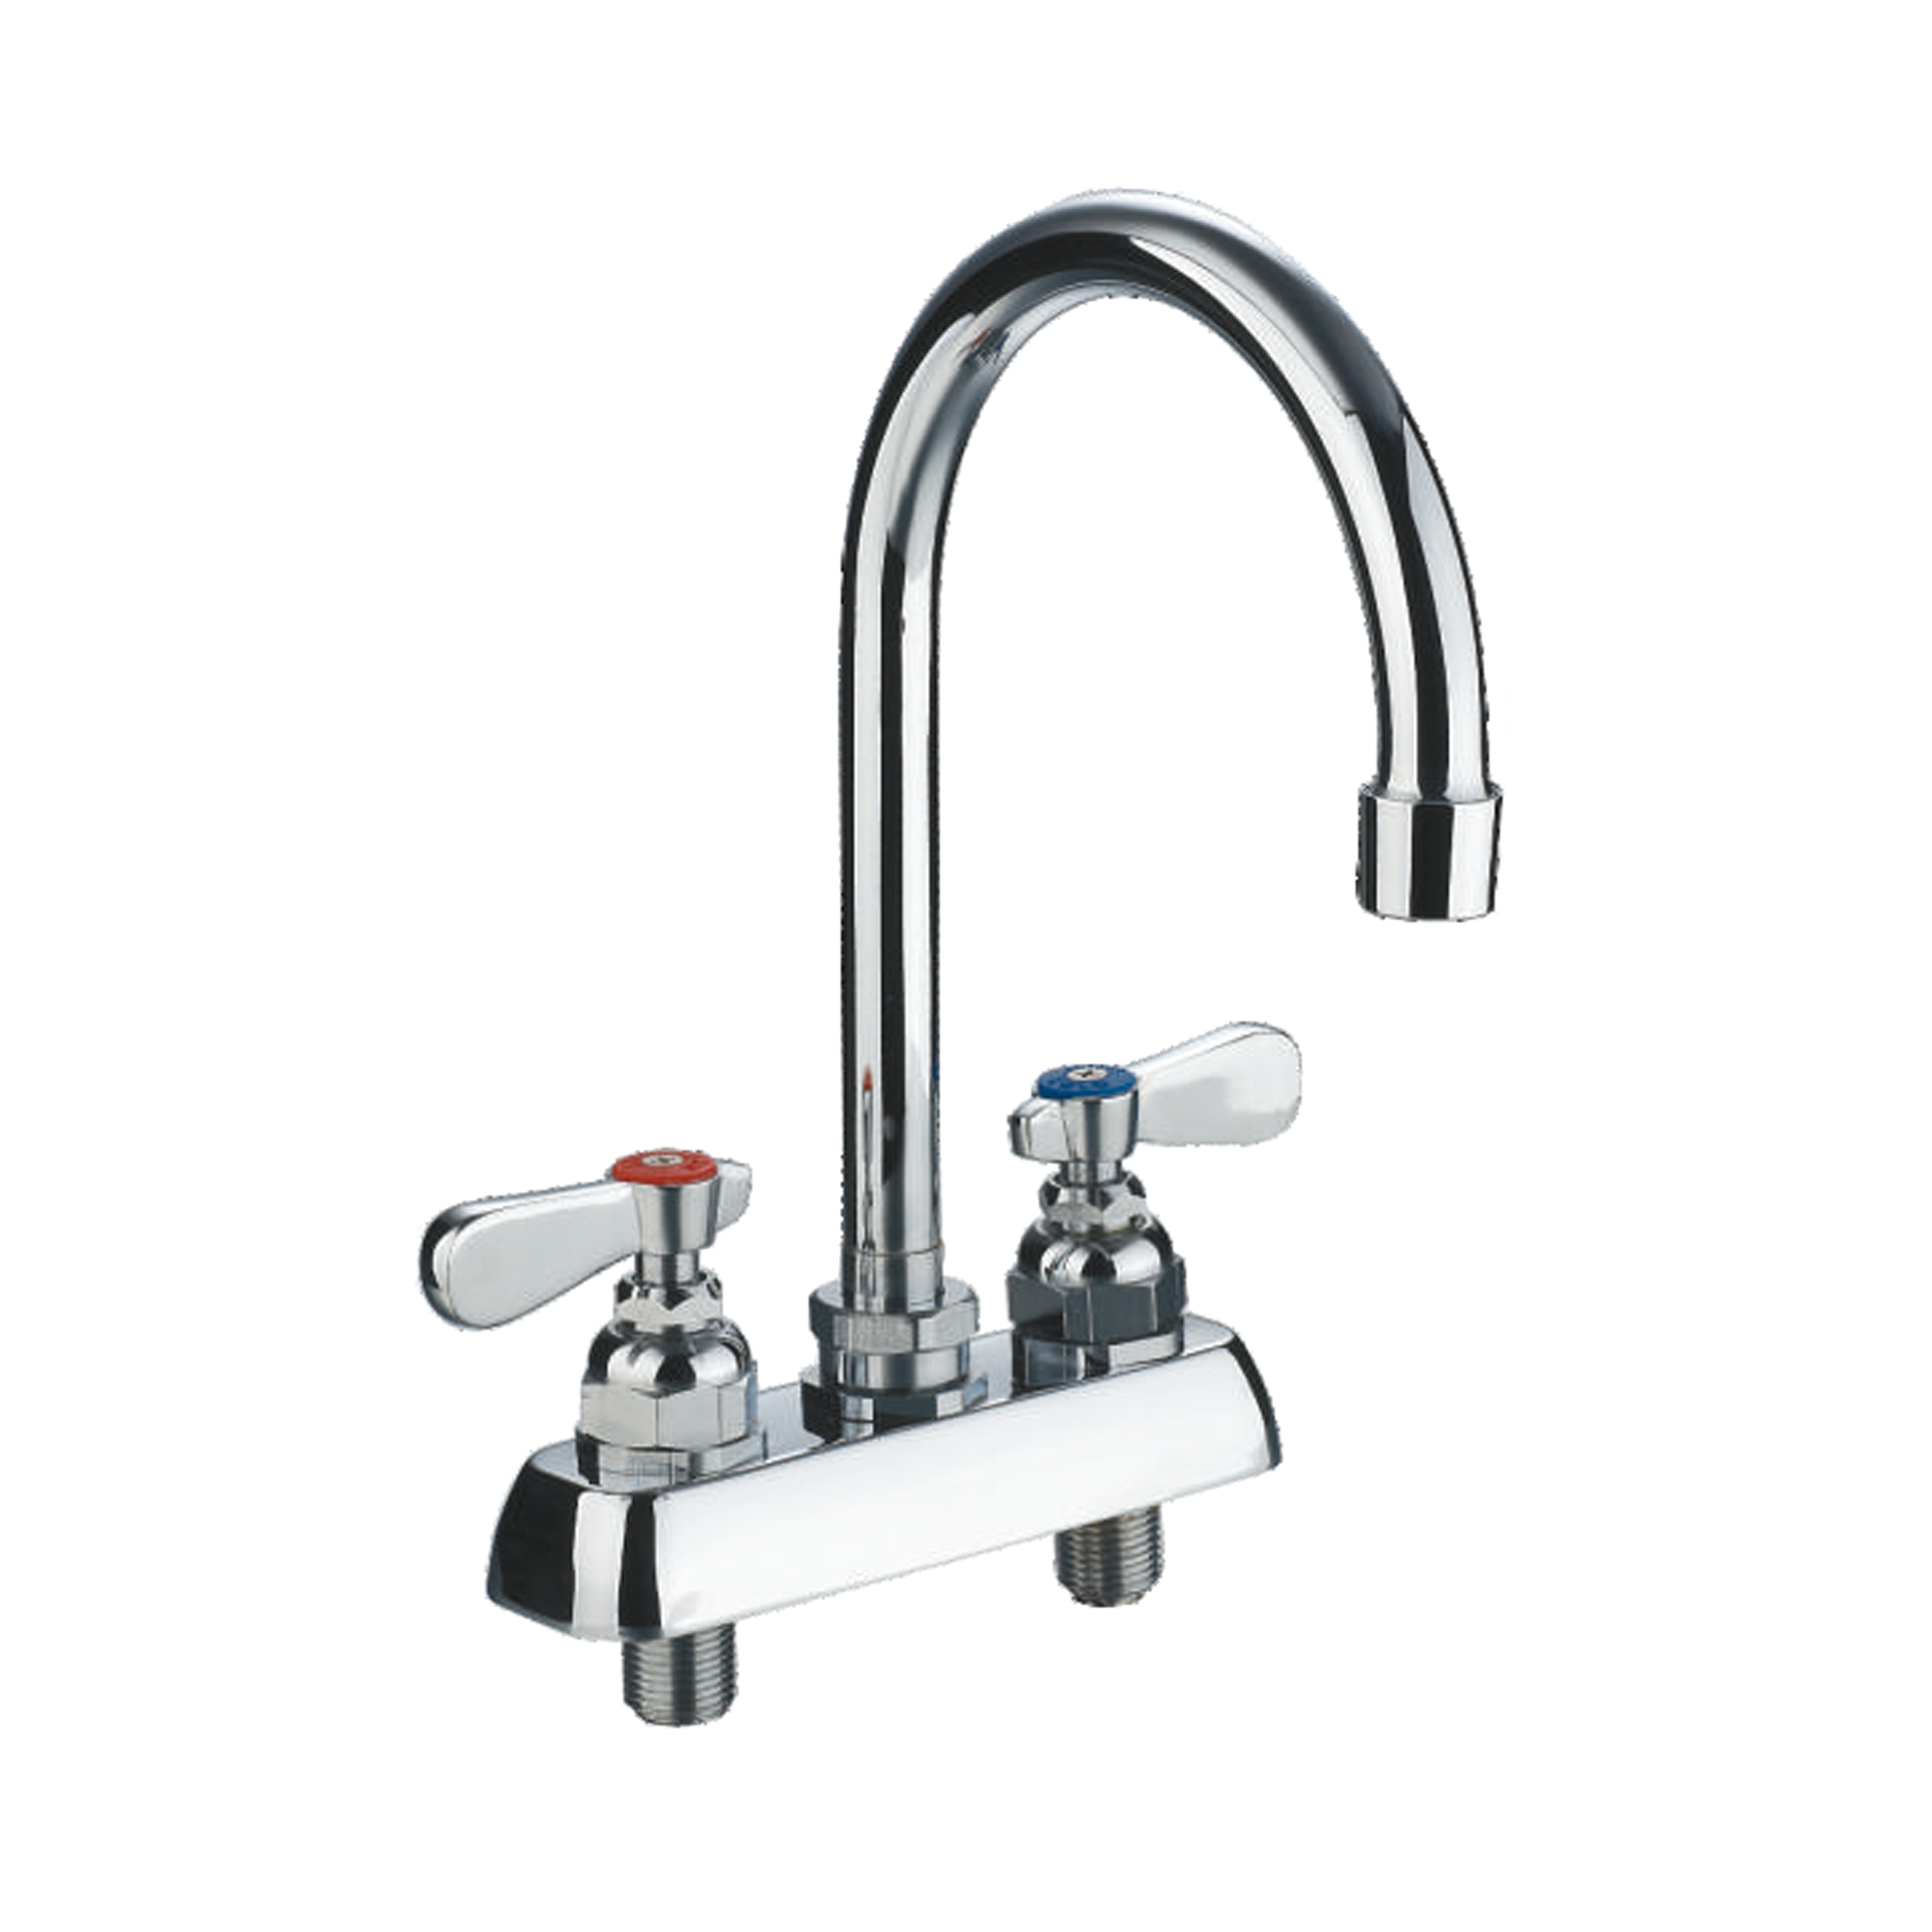 Top-rinse 9800-P3 Double workboard faucet